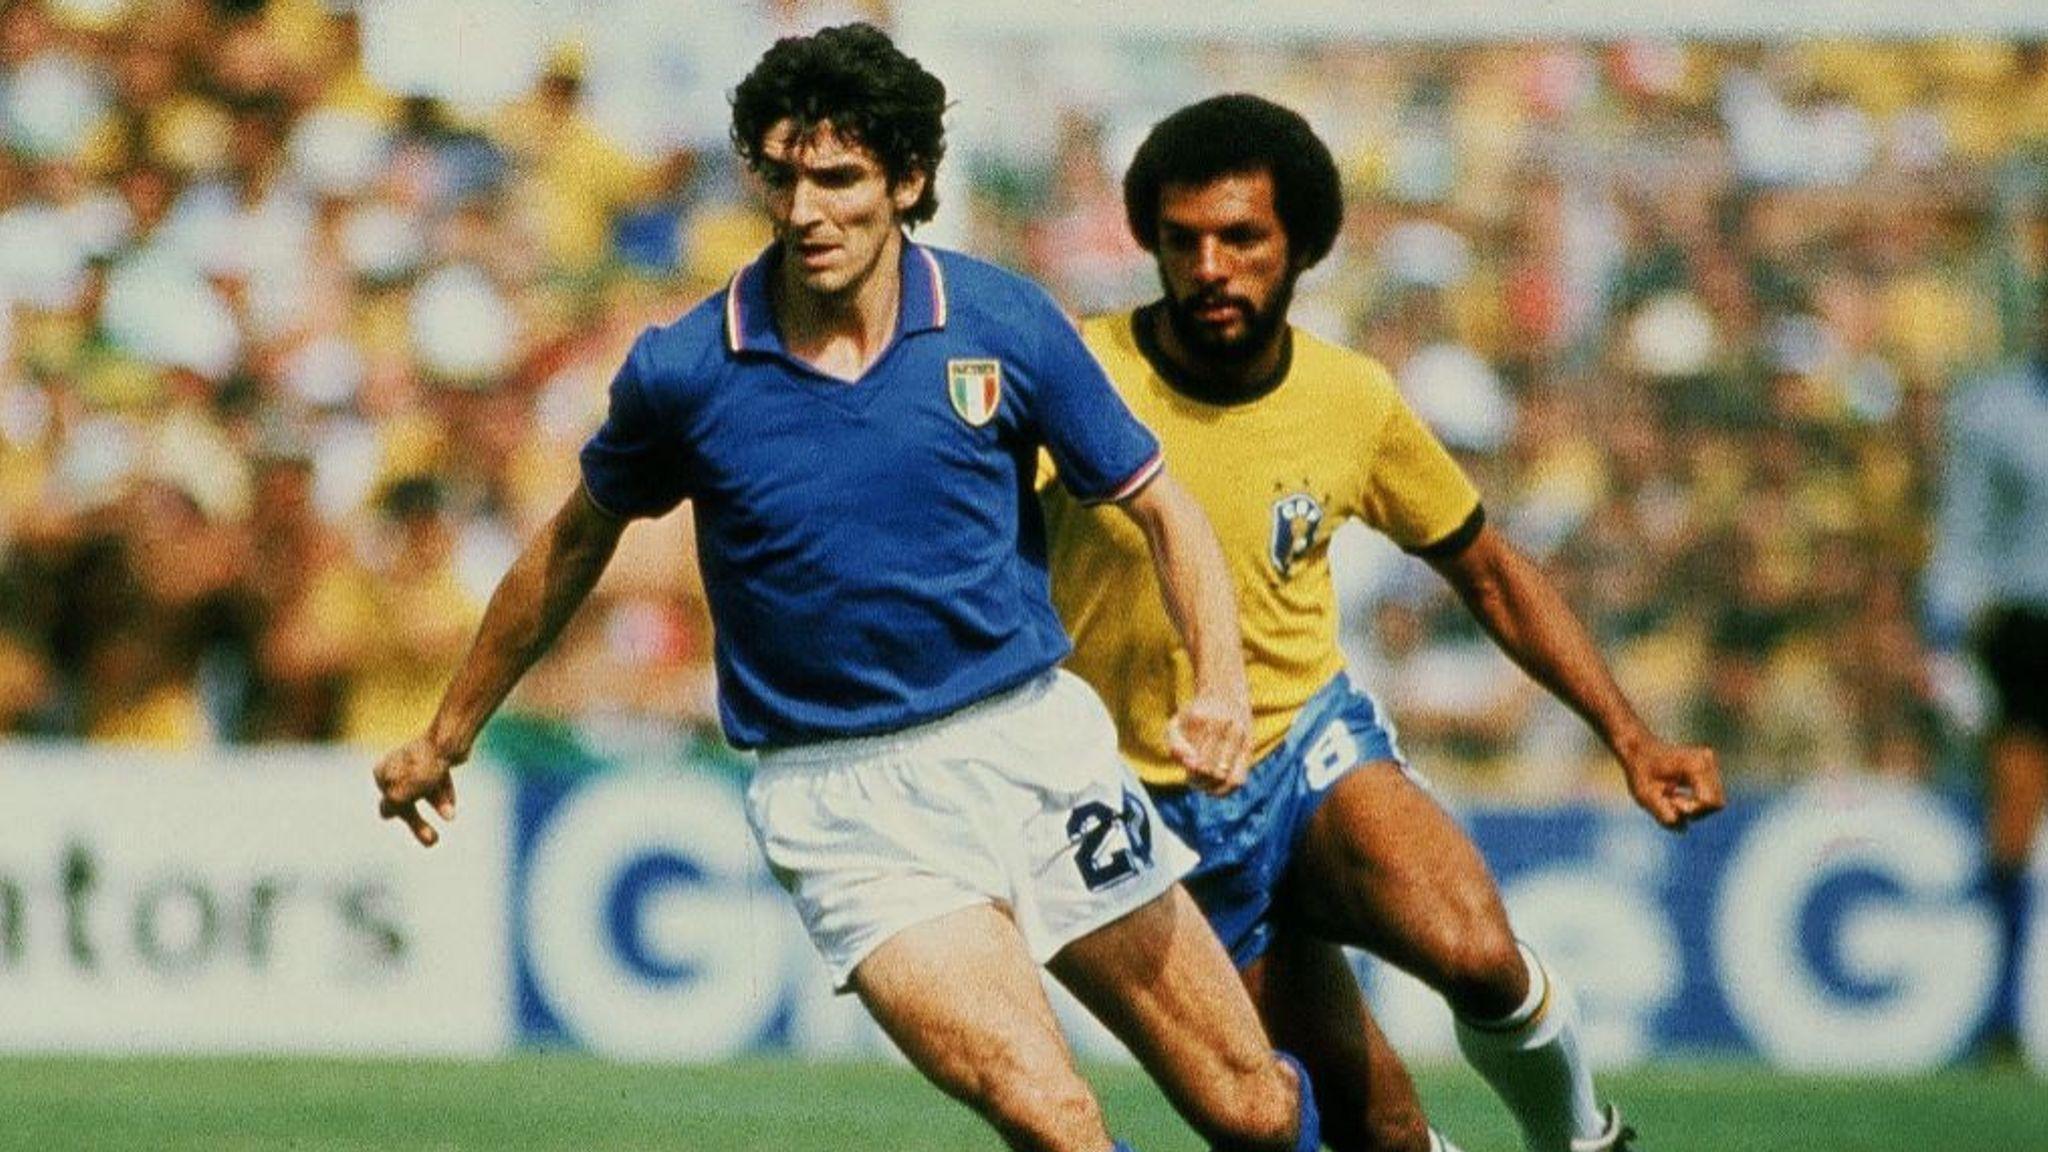 Rossi made his professional debut at Juventus in 1973. - Avaz